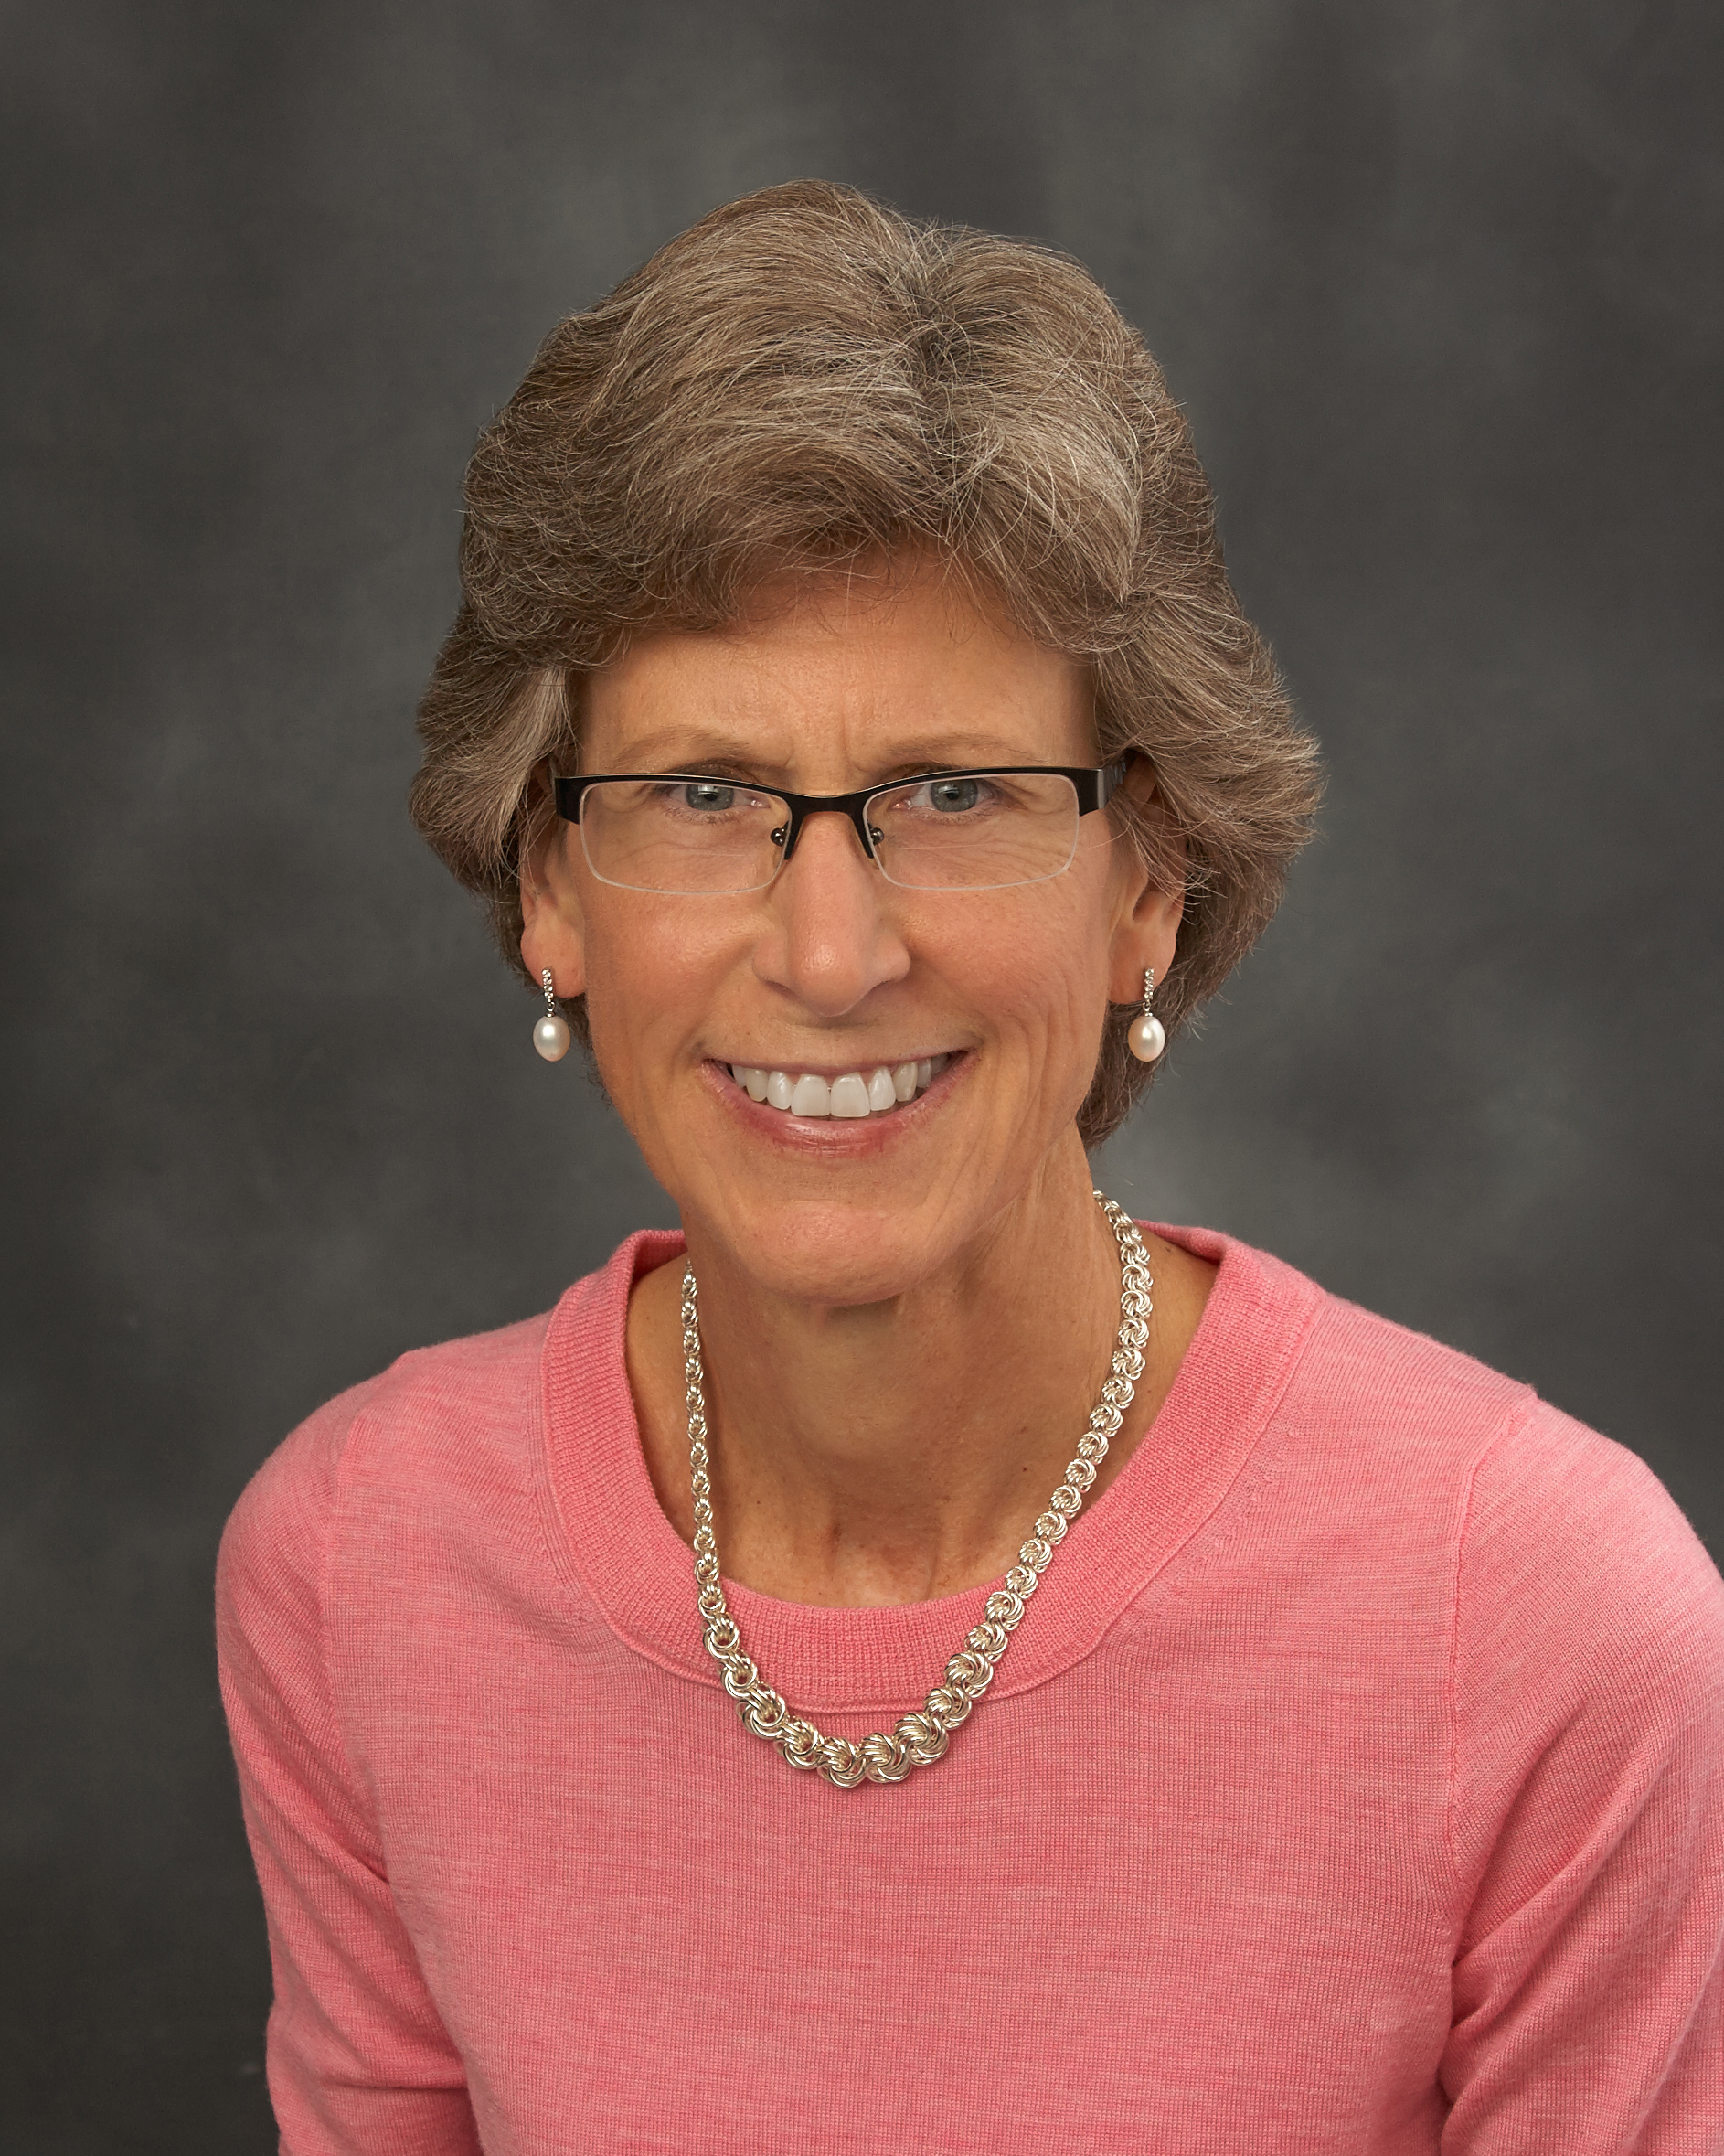 Dr. Deb Perry